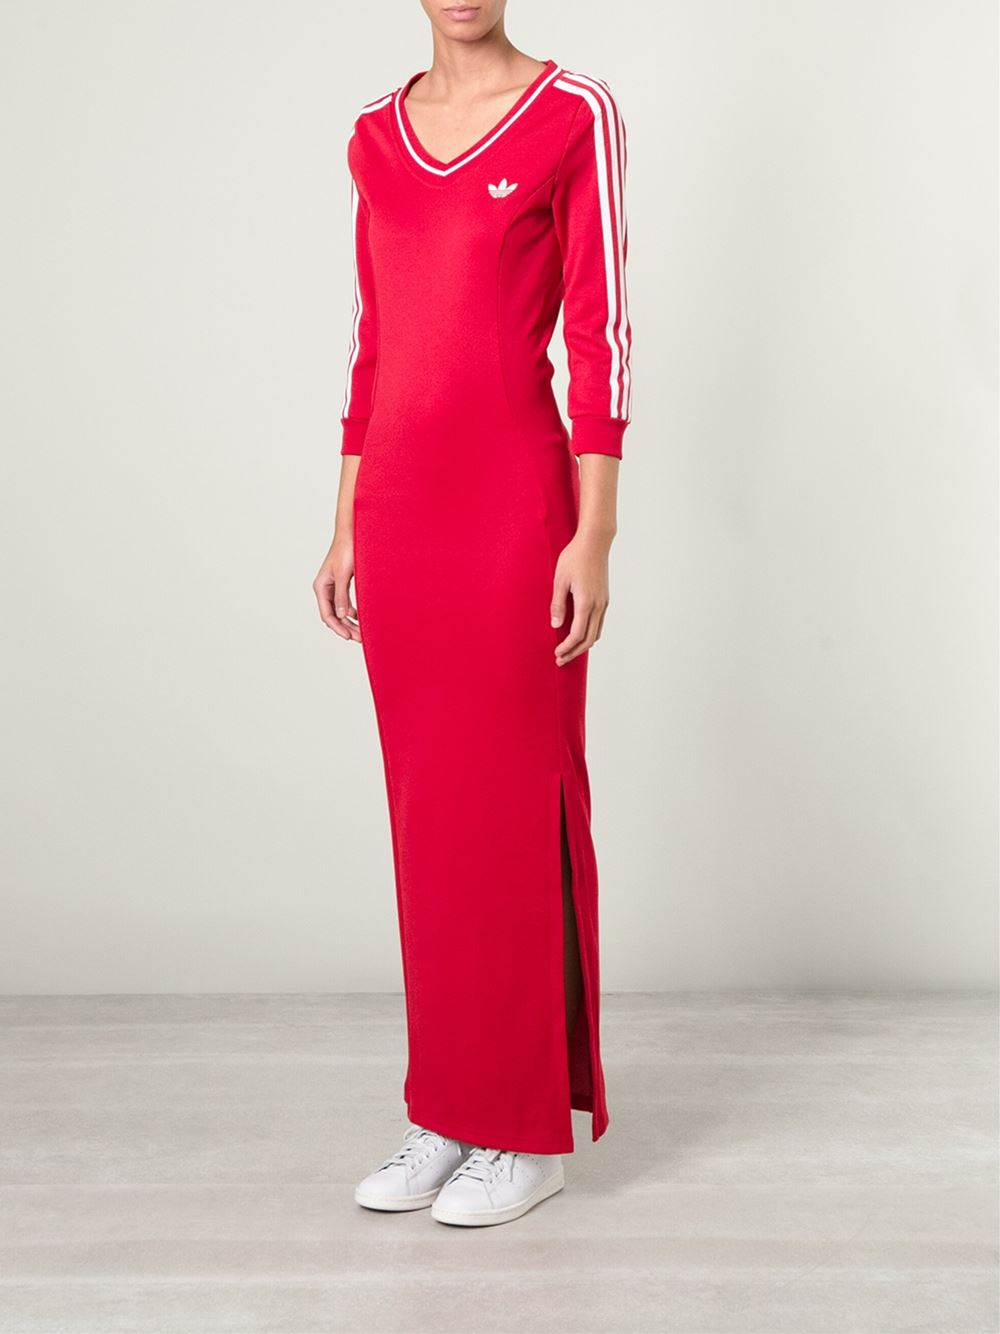 Adidas Long Line Jersey Dress in Red | Lyst